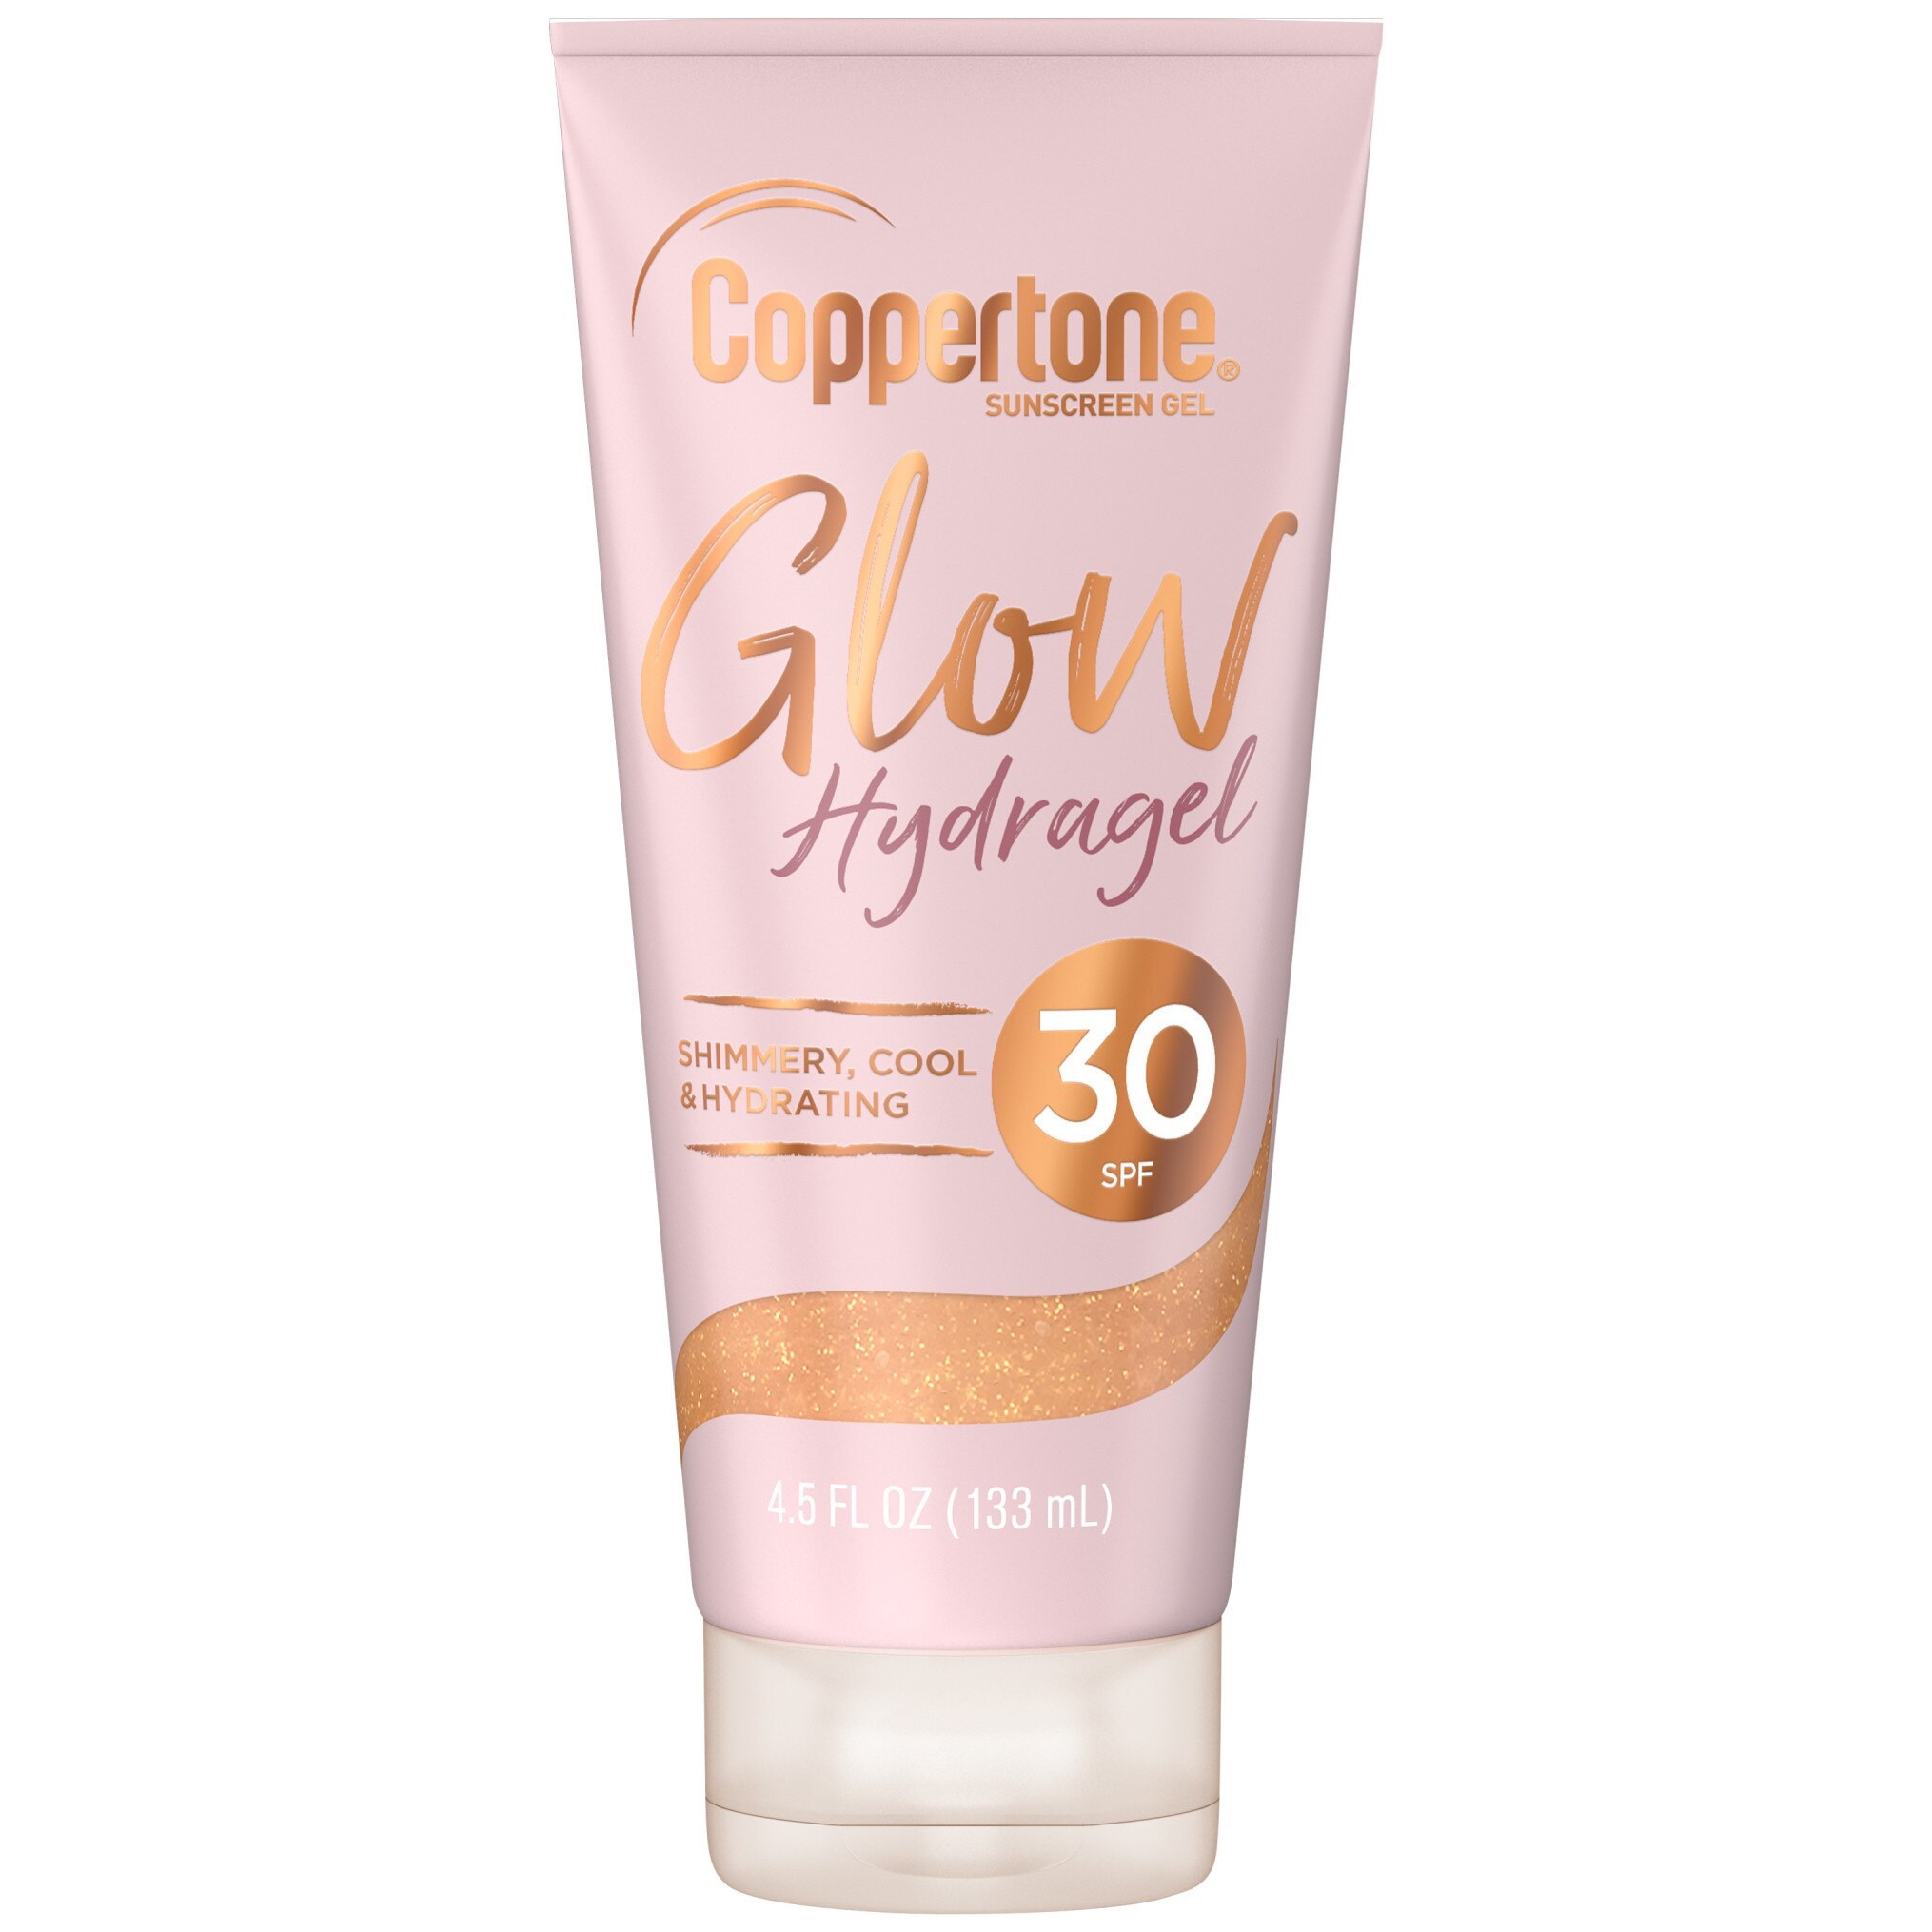 Coppertone Glow Hydragel Sunscreen Lotion with Shimmer, 4.5 OZ